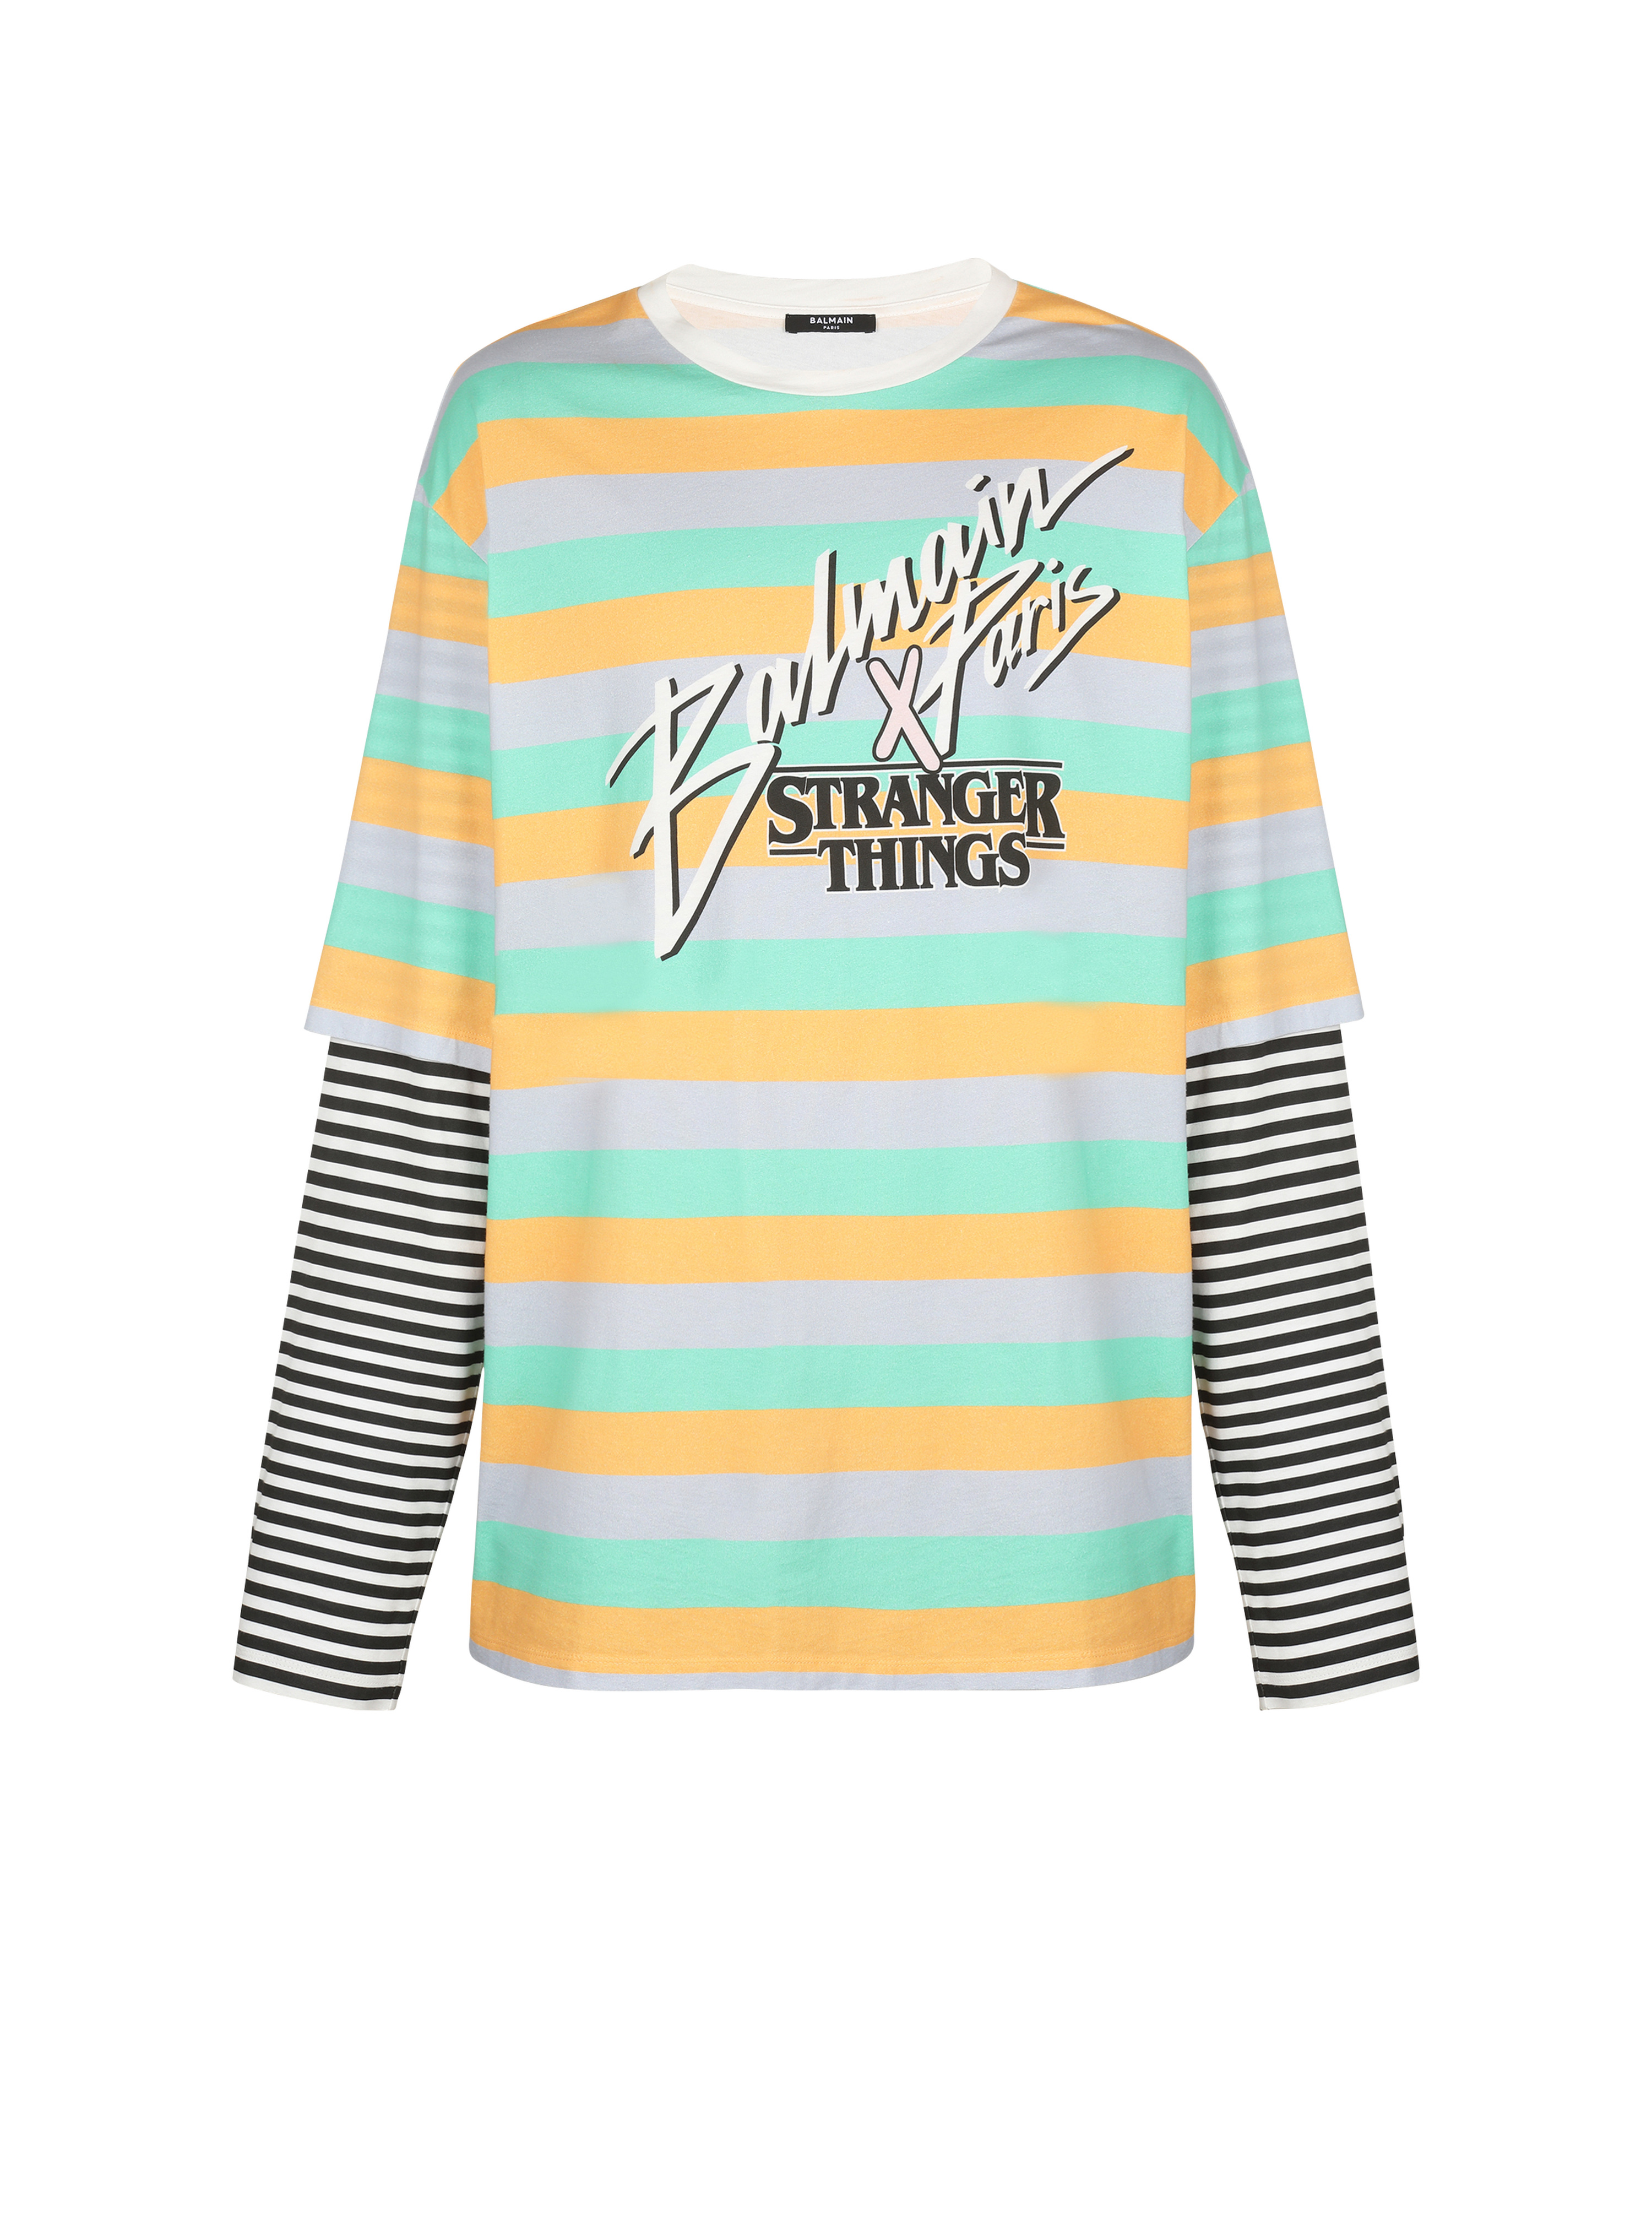 Balmain x Stranger Things - Oversize T-shirt with double sleeves, multicolor